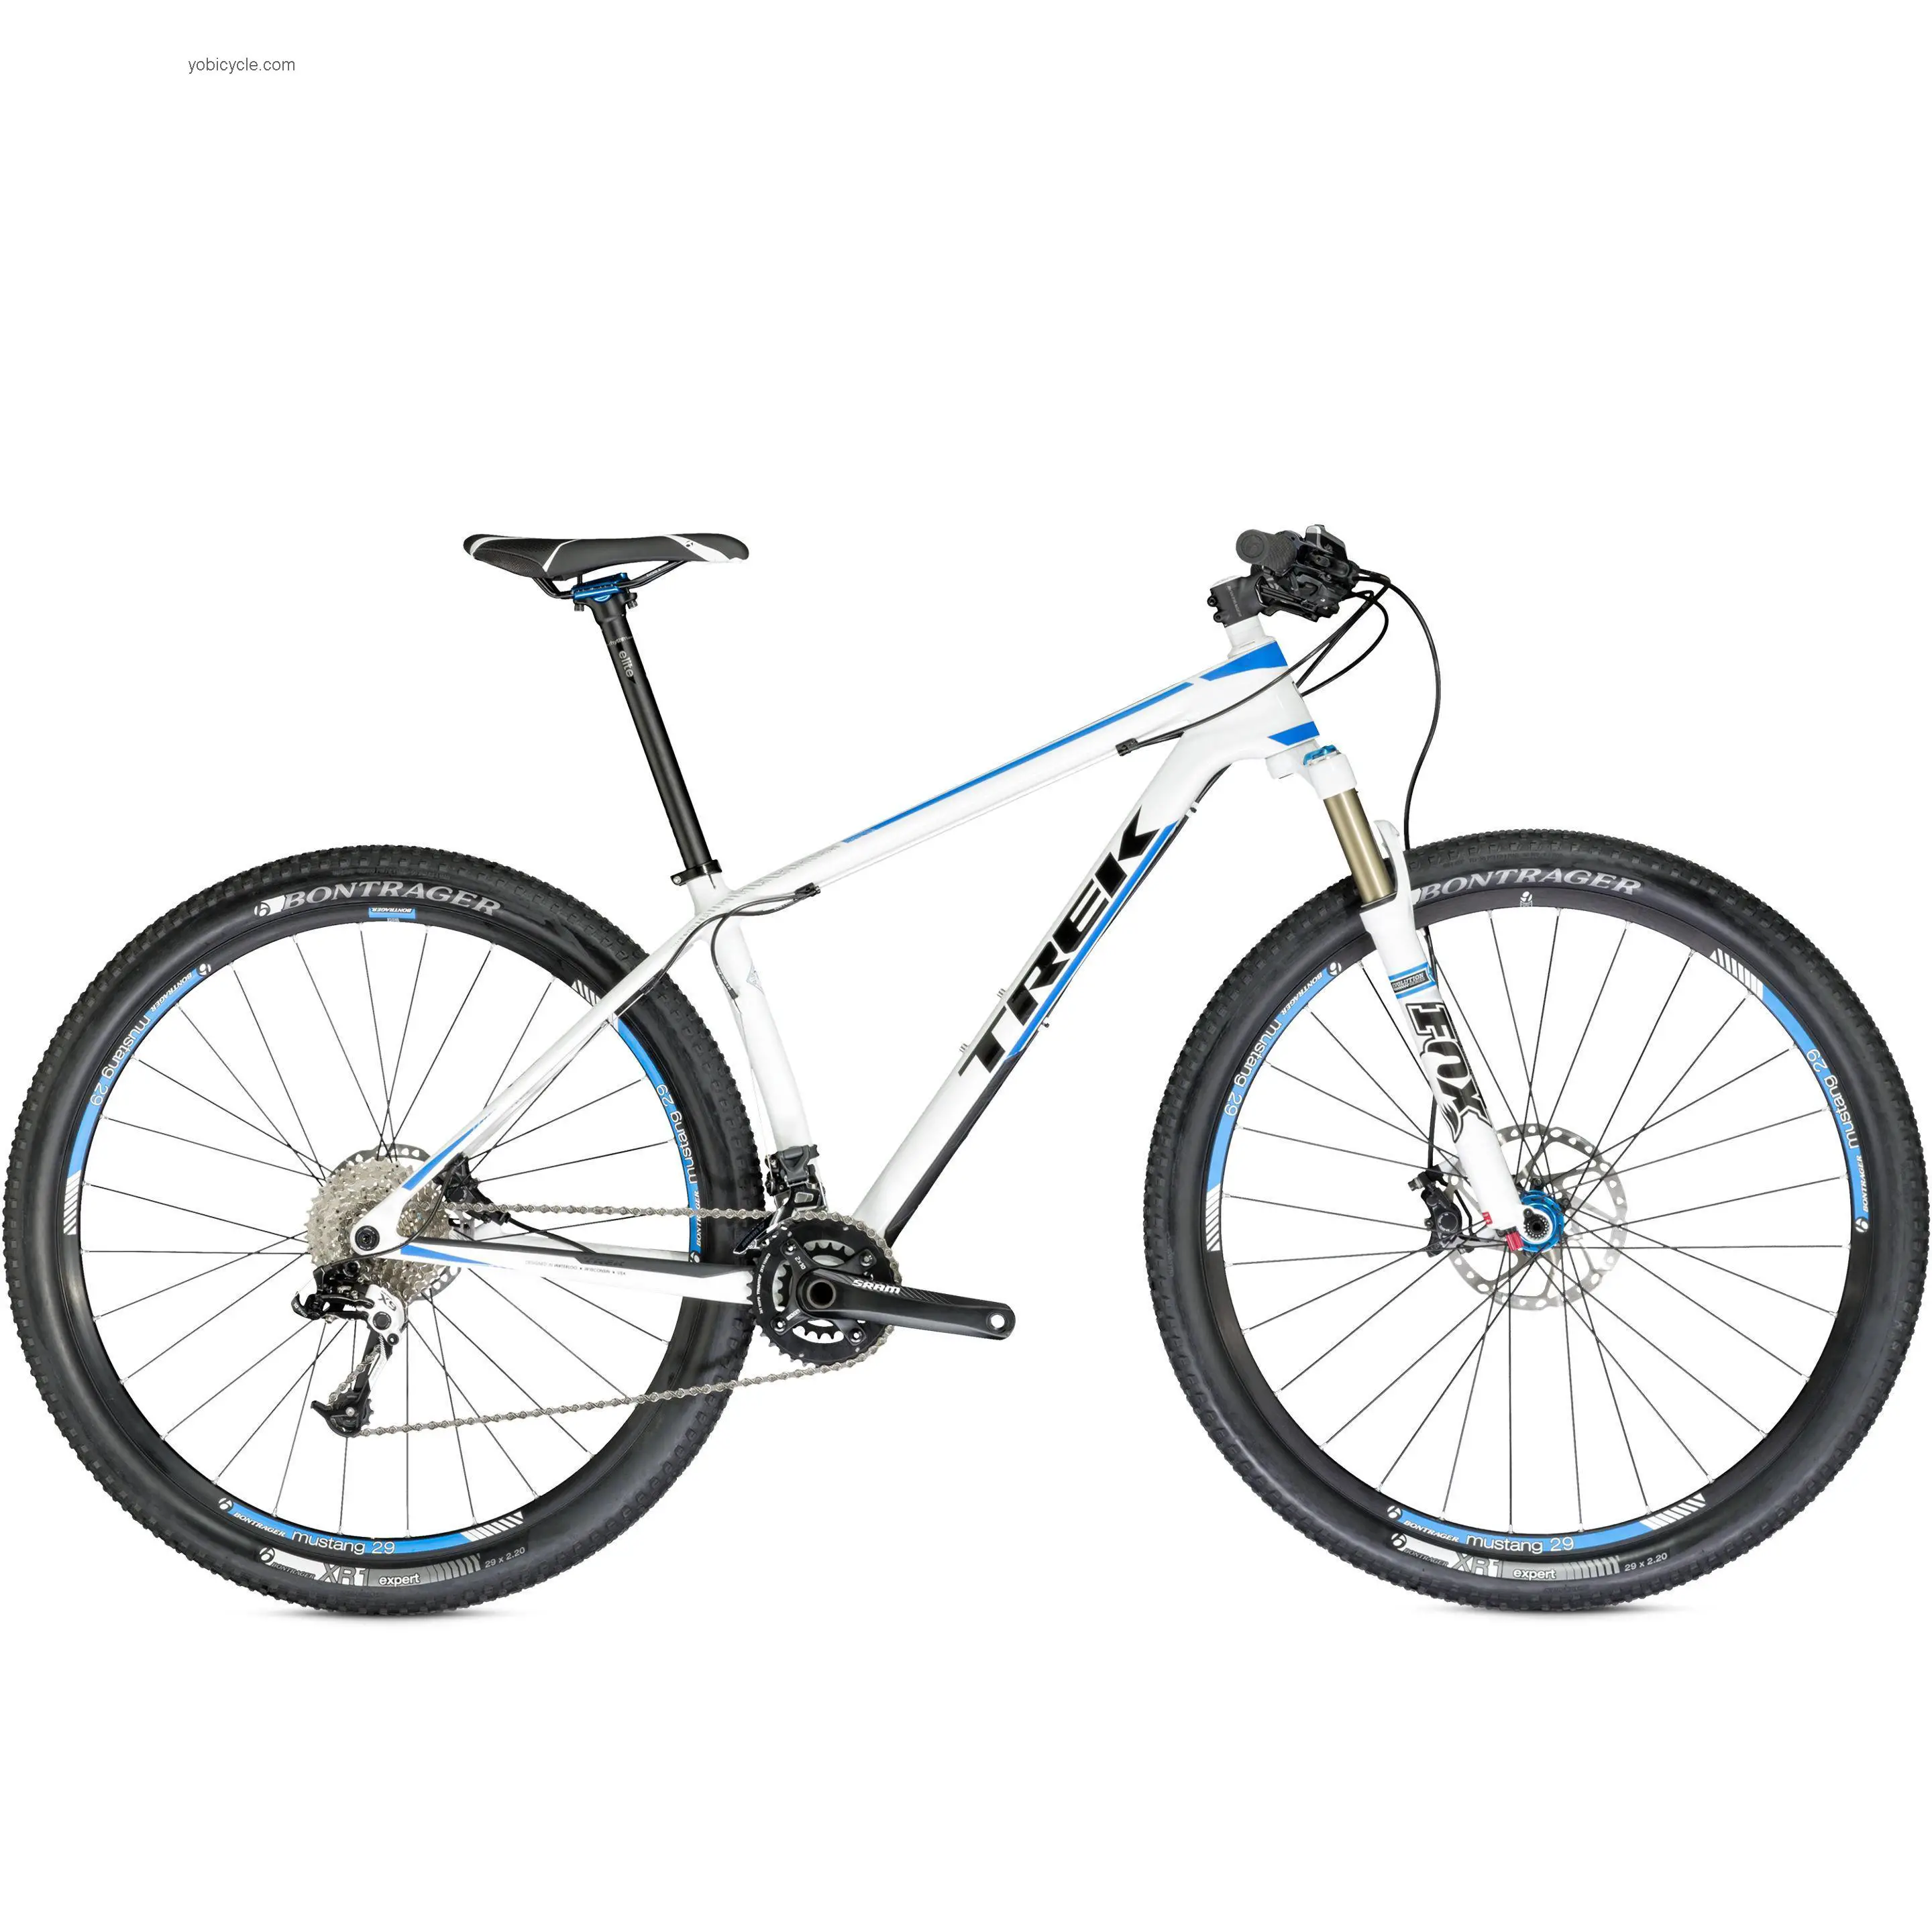 Trek Superfly 9.7 2014 comparison online with competitors